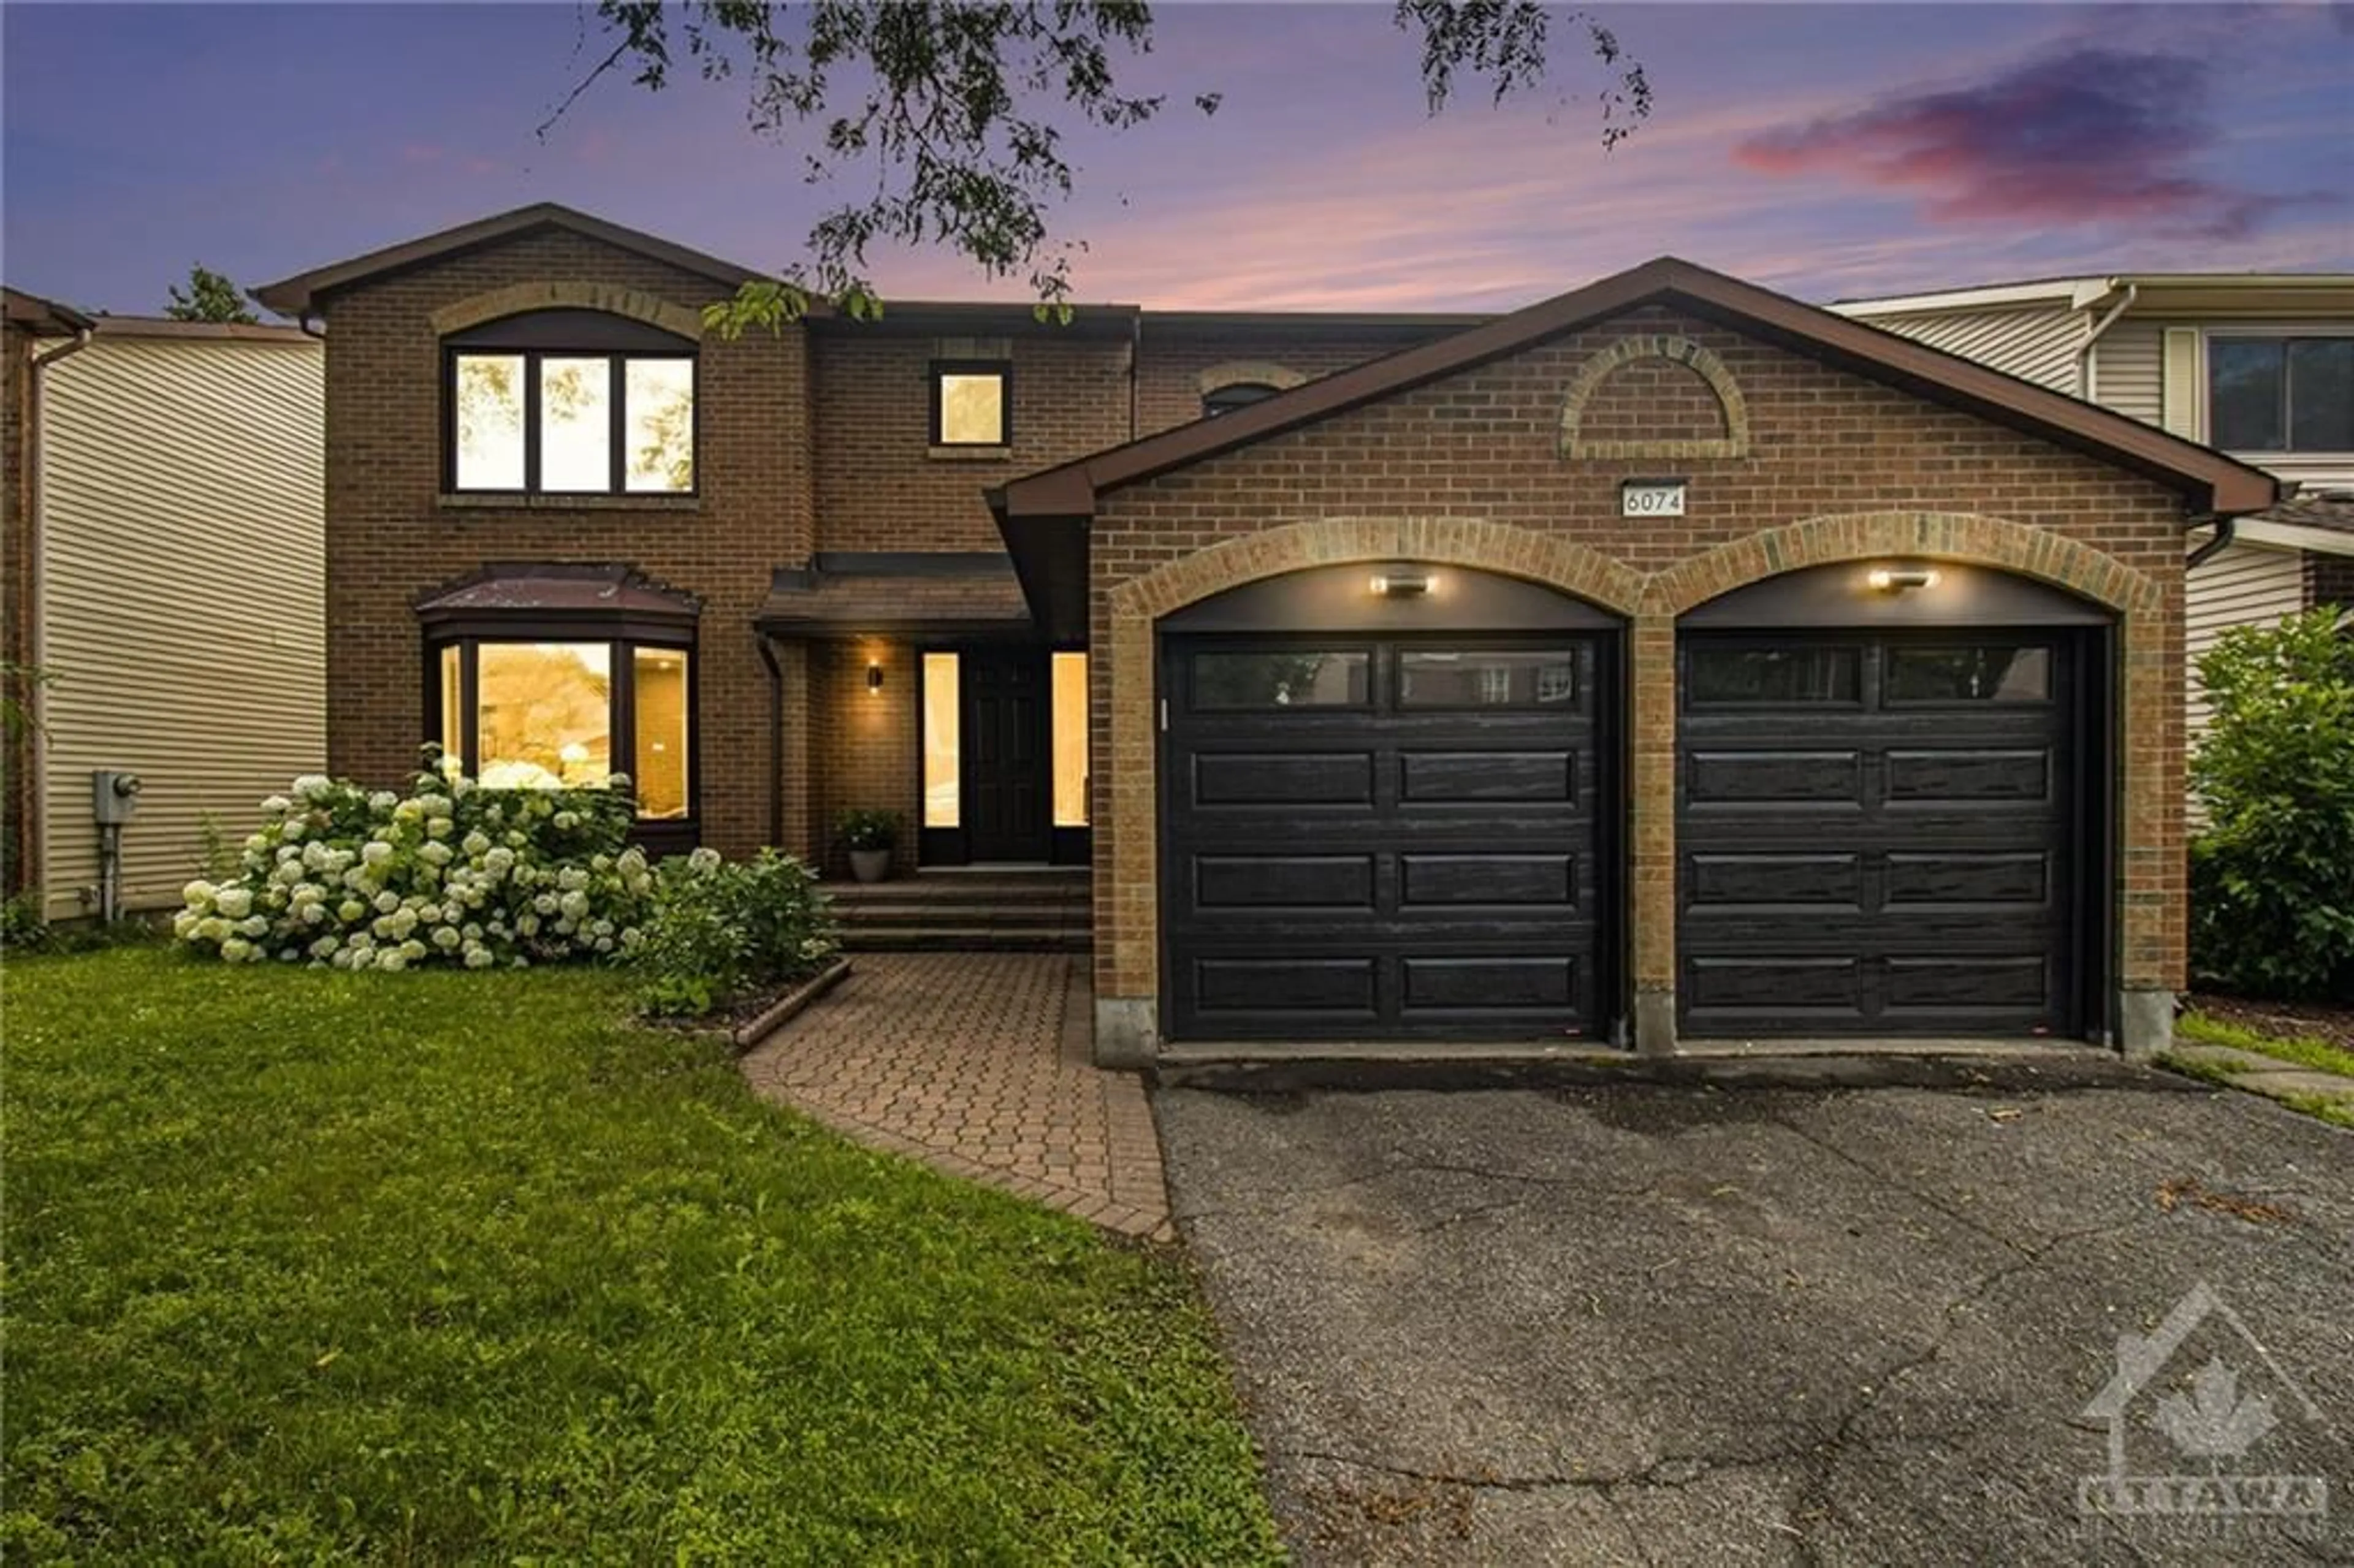 Home with brick exterior material for 6074 MEADOWGLEN Dr, Ottawa Ontario K1C 5R6